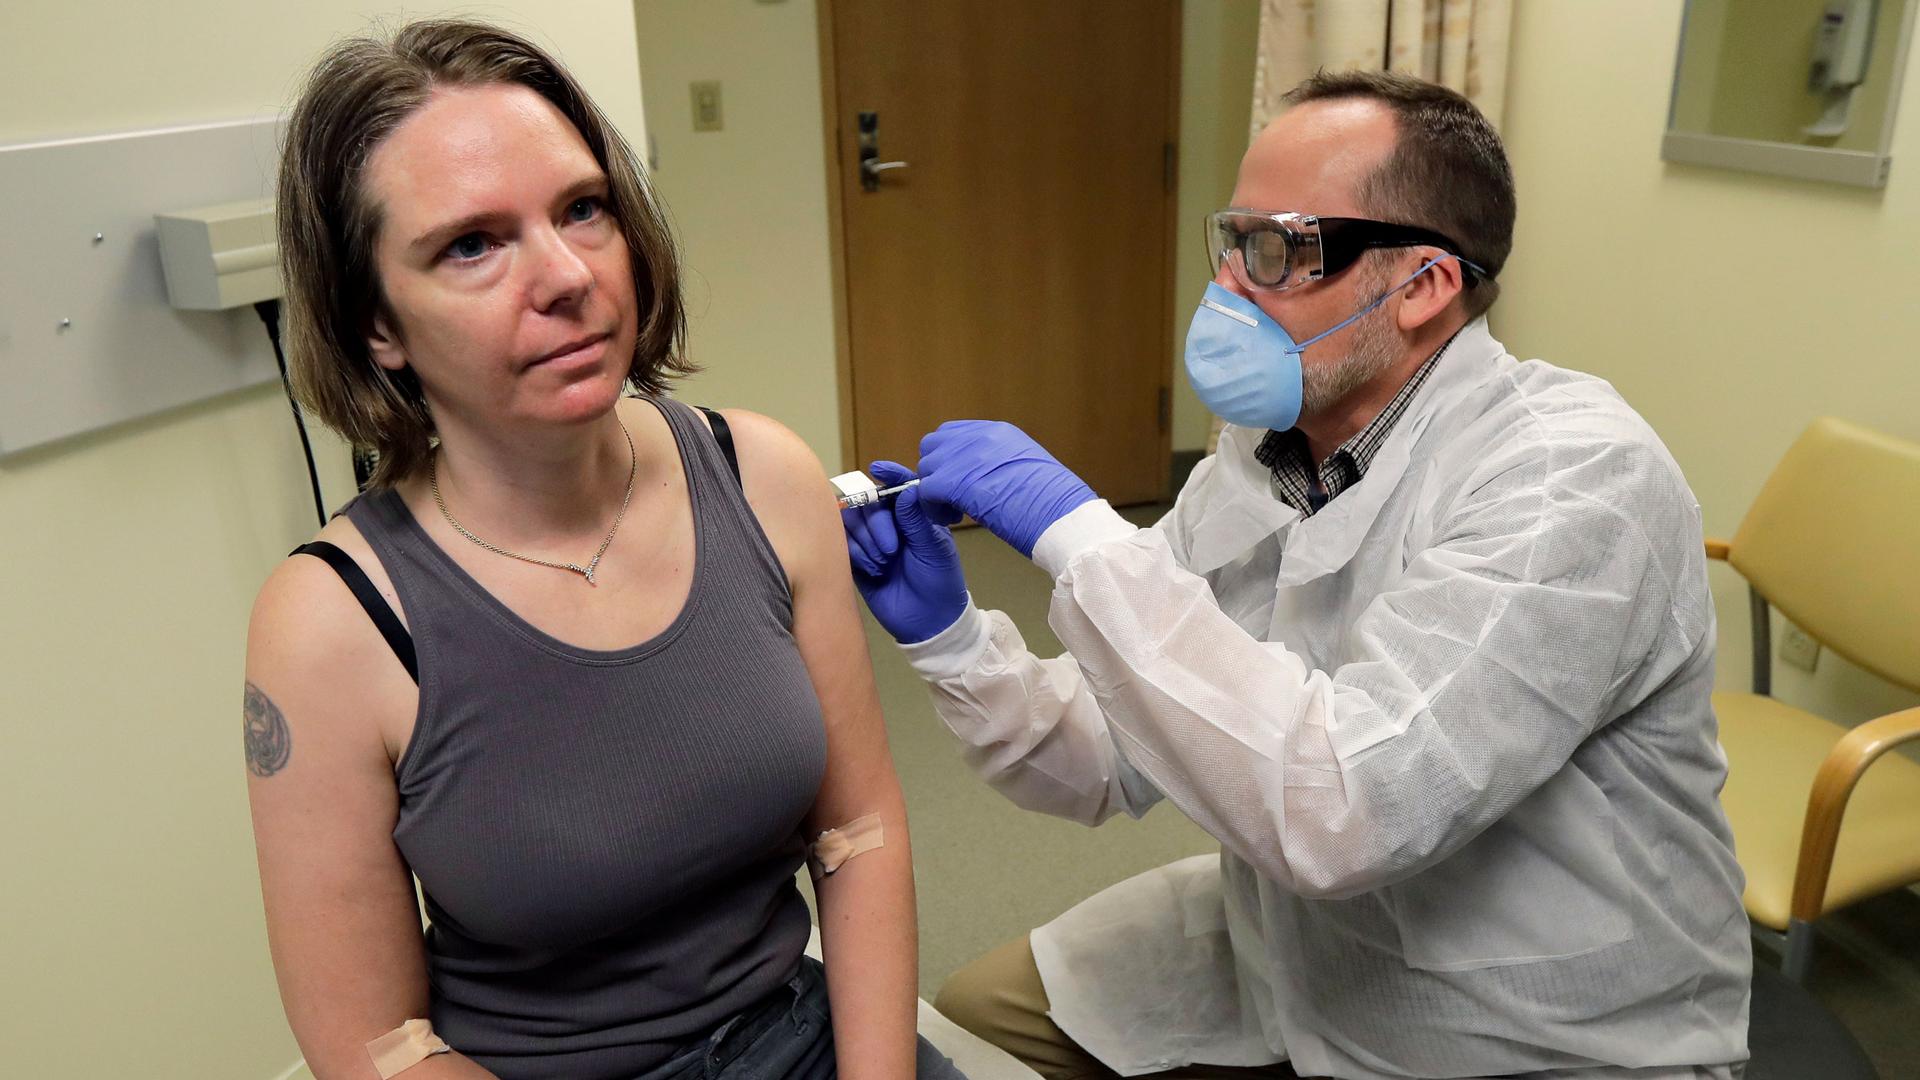 A woman is shown wearing a tank top and sitting while receiving an injection from a medical professional.